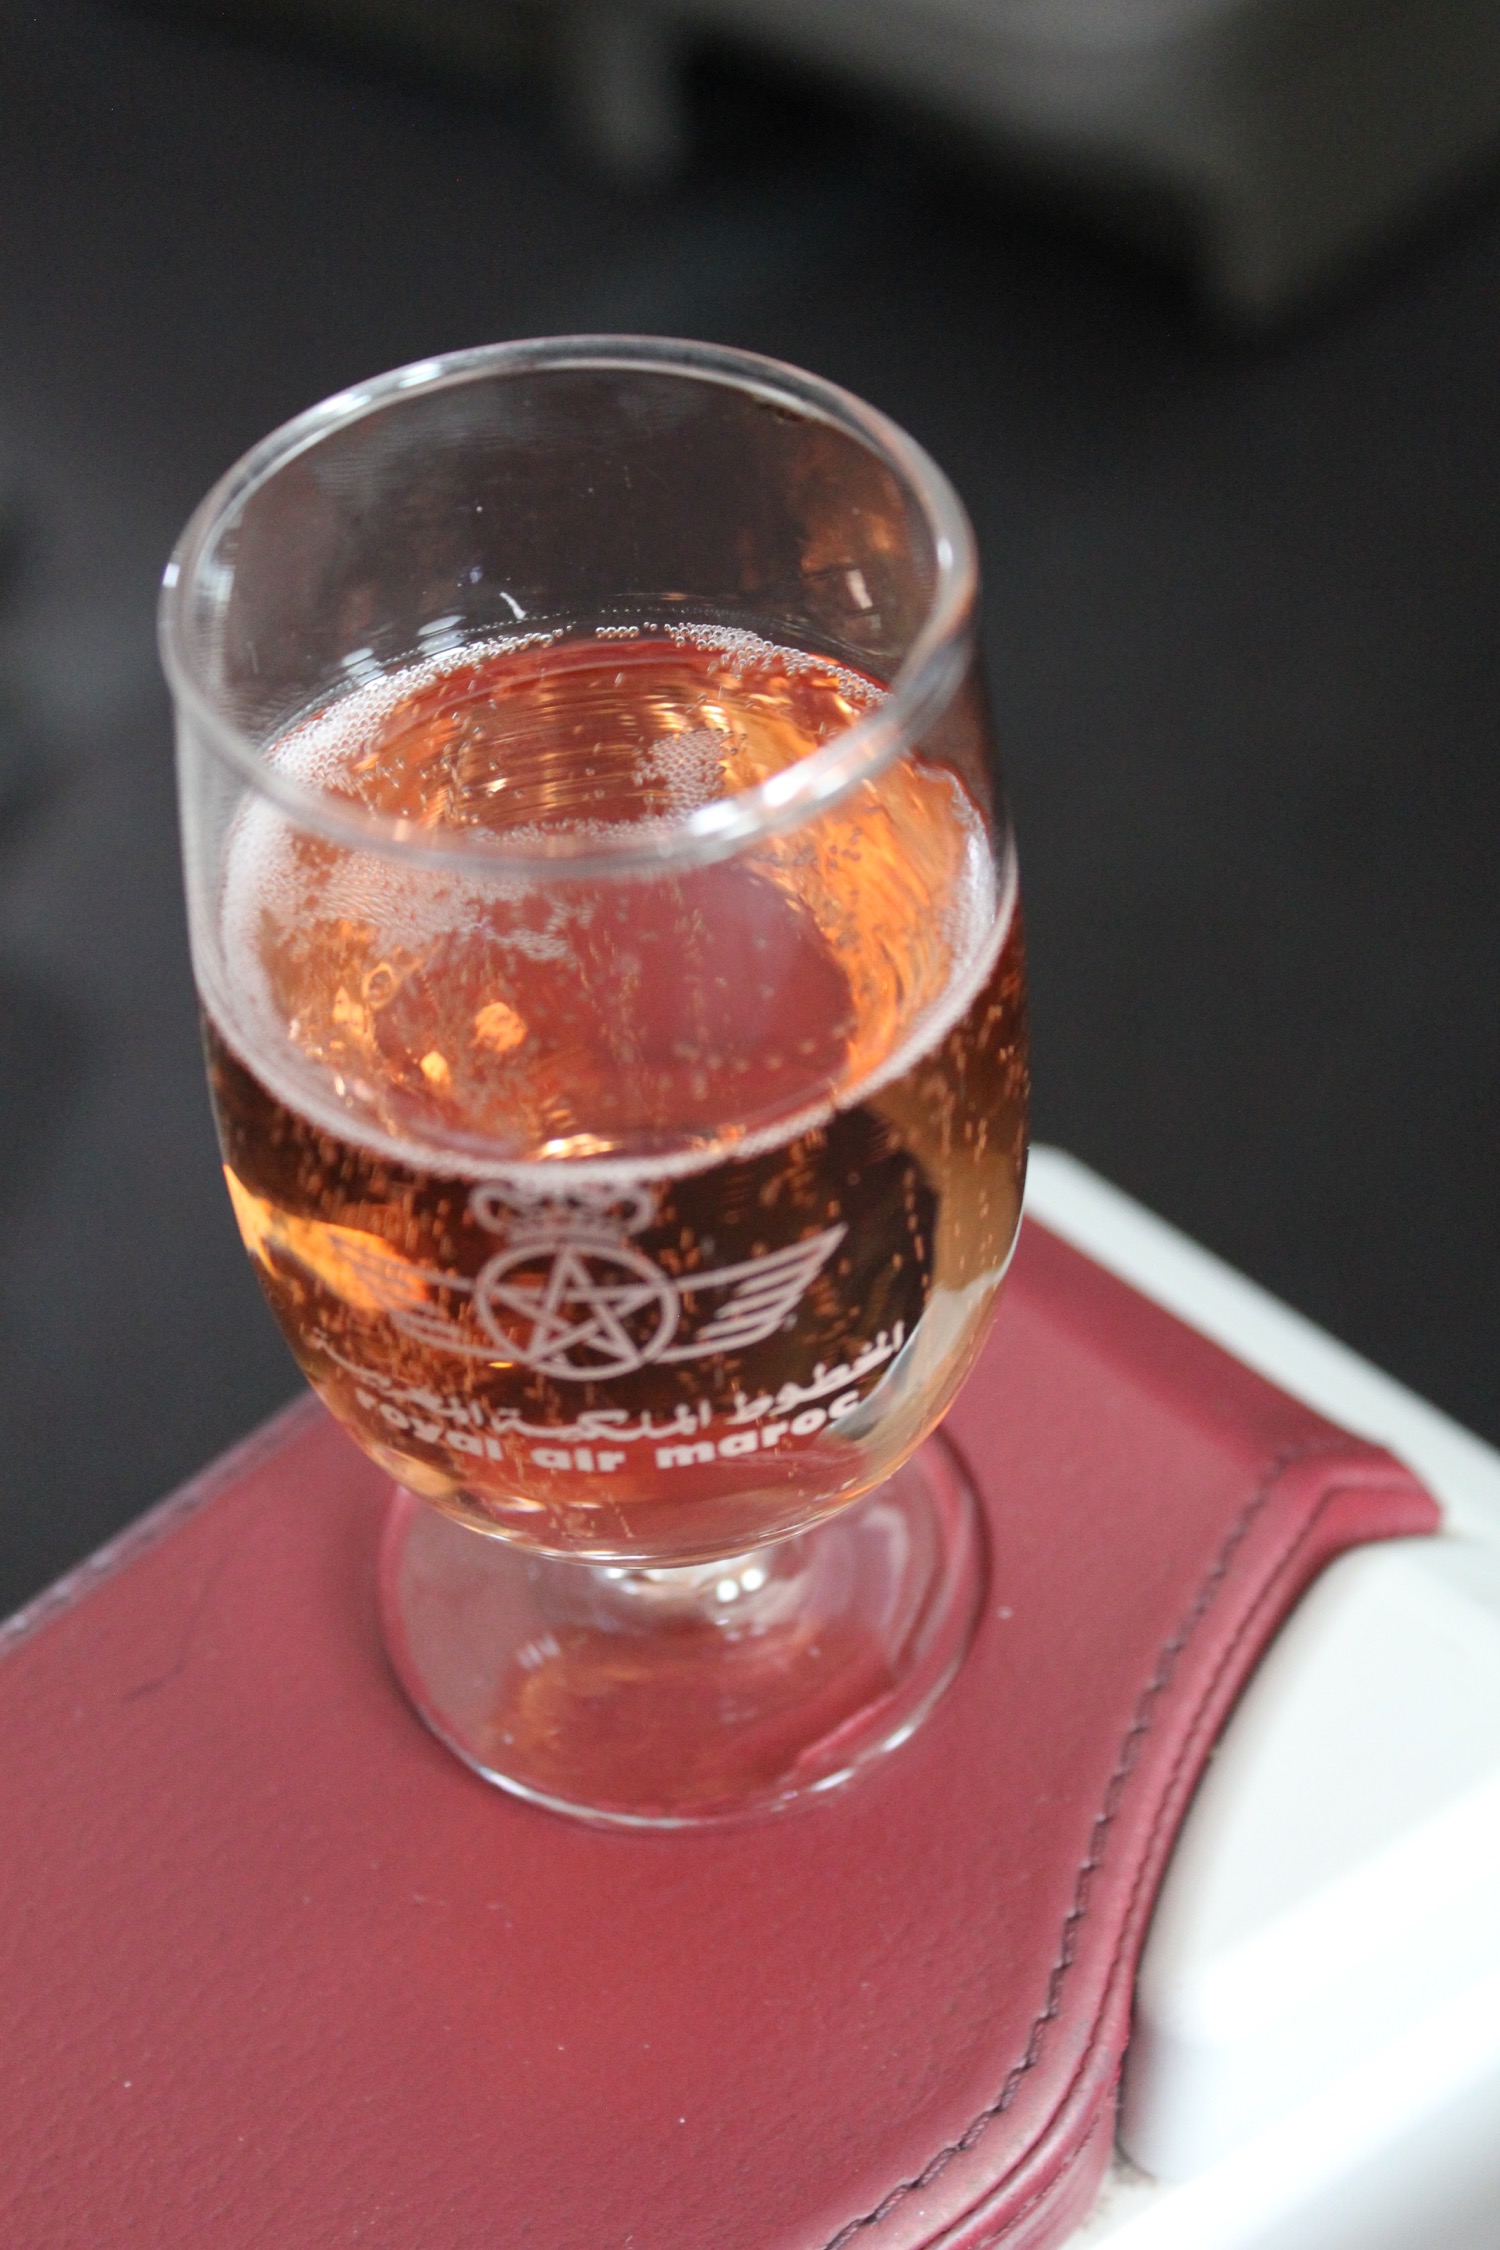 a glass of liquid on a red leather surface